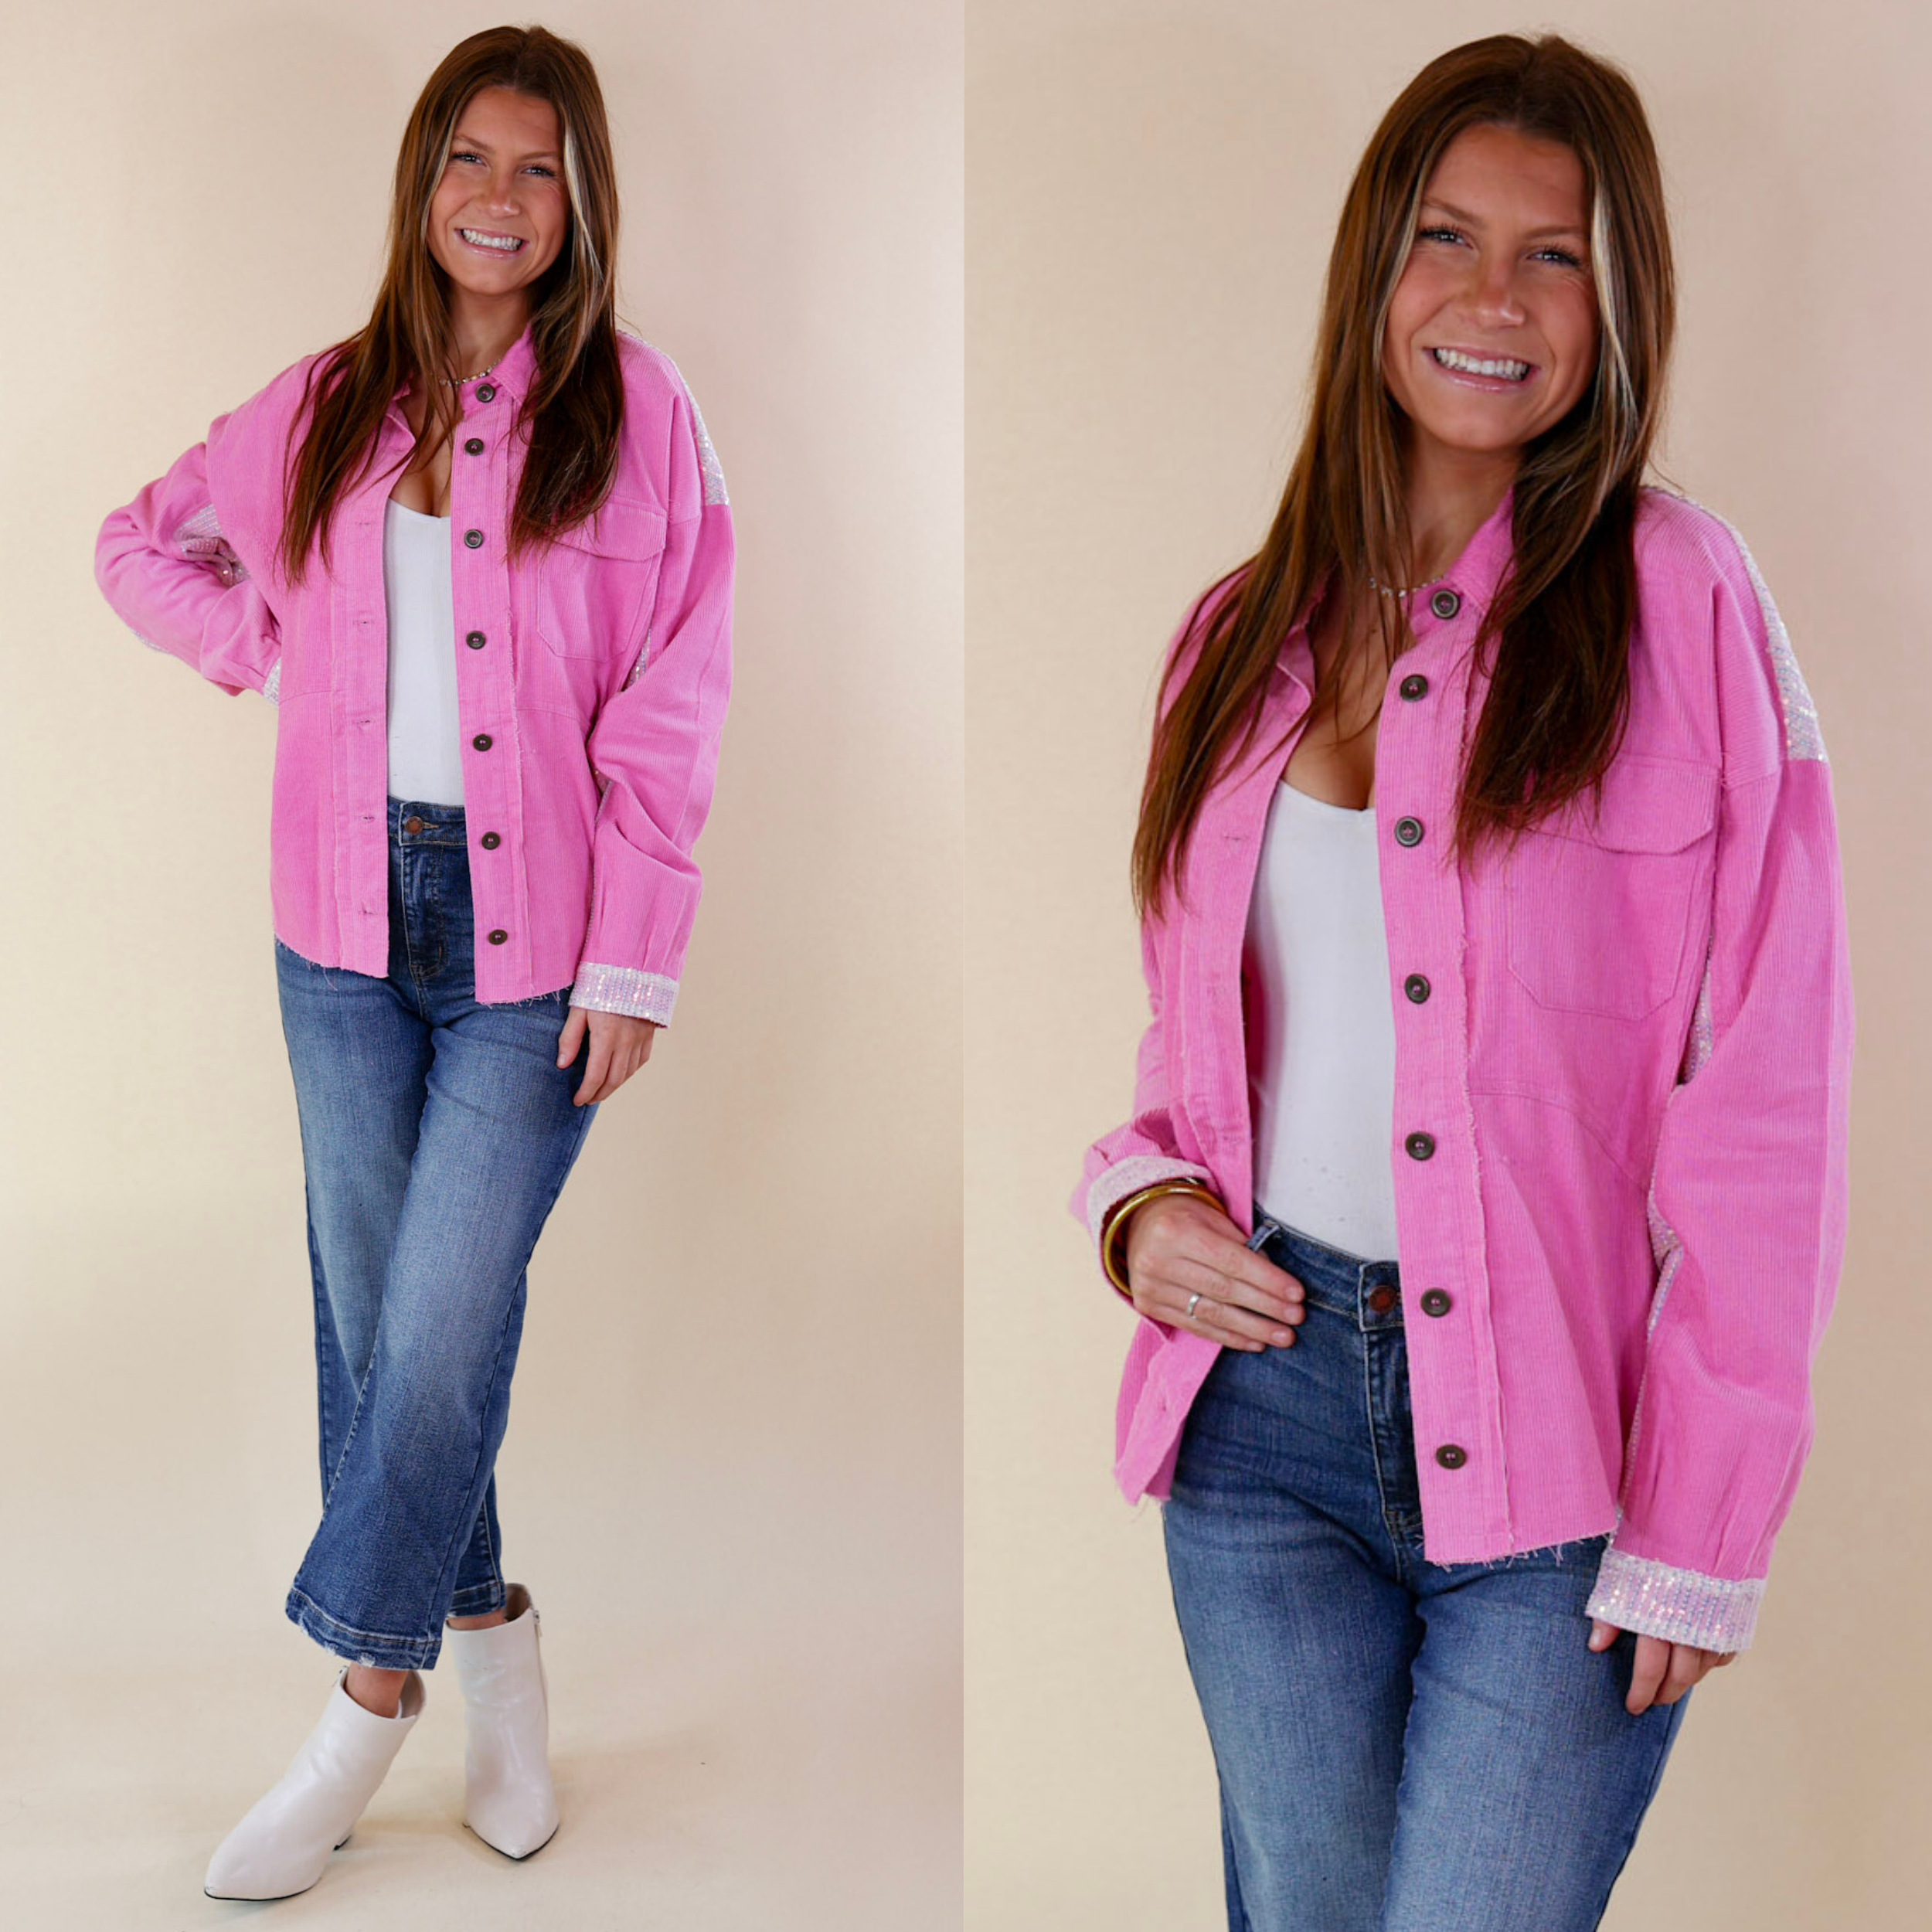 Model is wearing a pink sequin jacket. Model has paired this with dark wash jeans, white shirt, white booties, and silver jewelry.